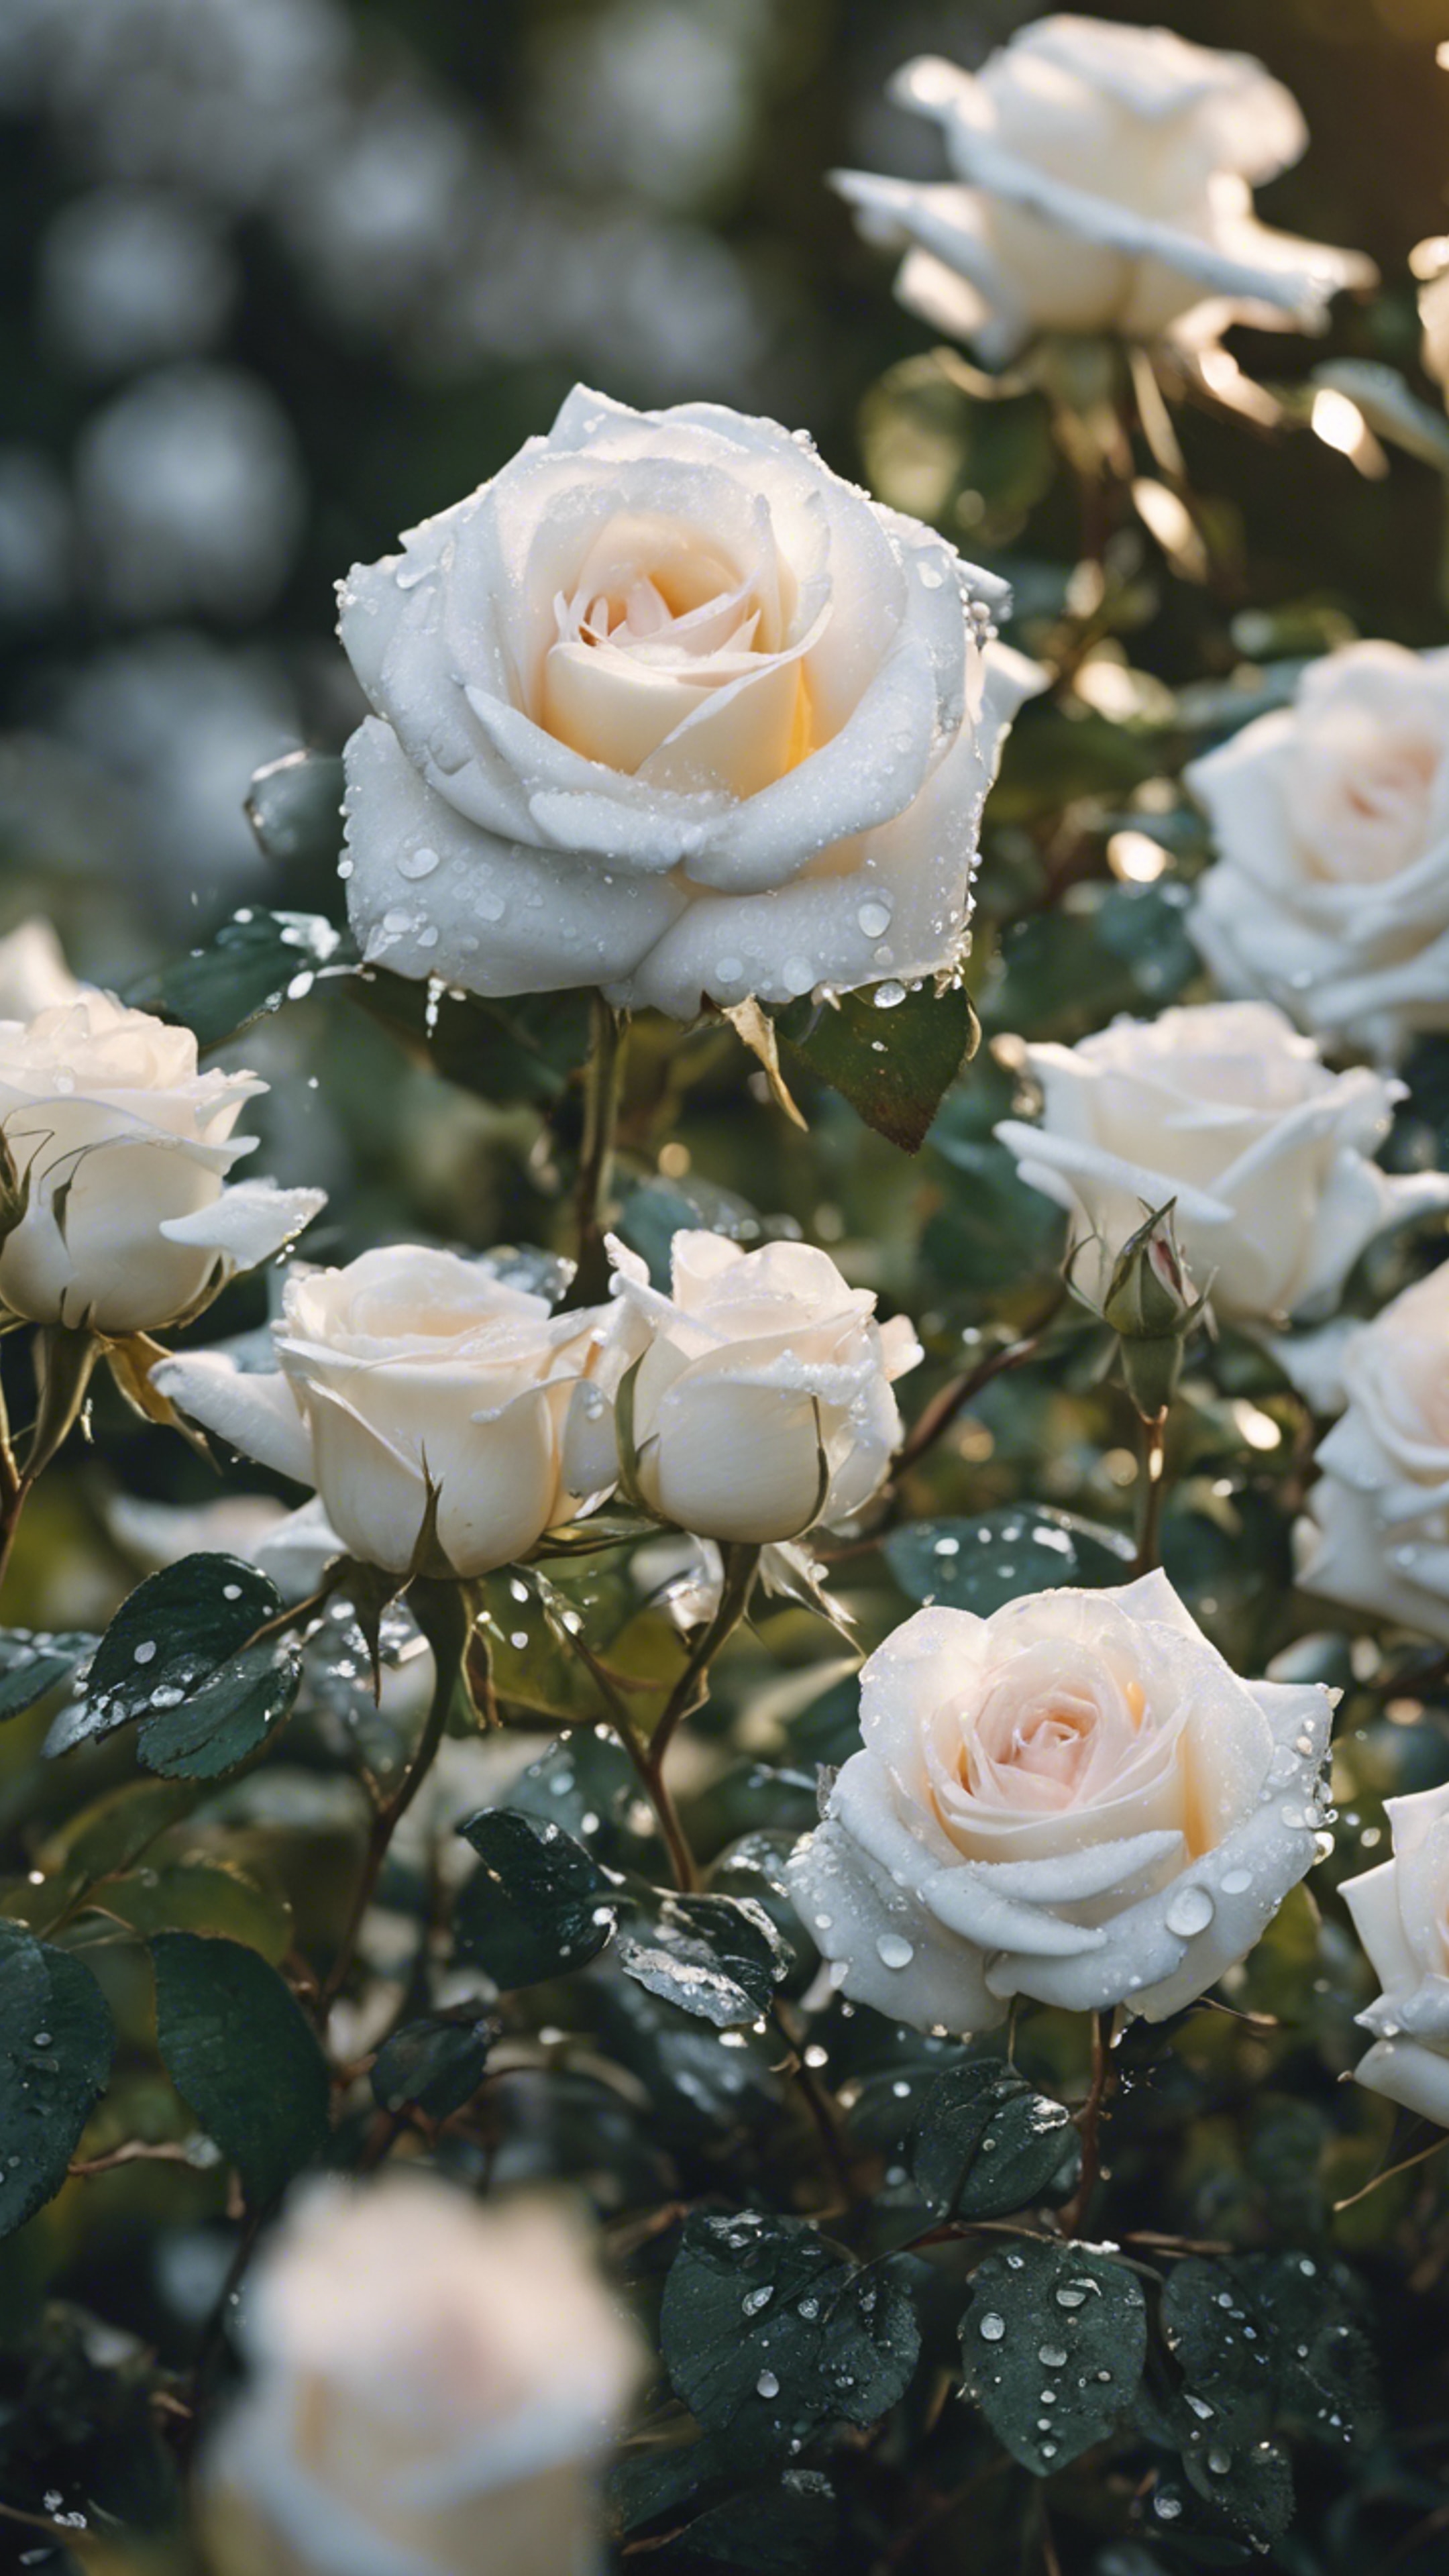 White roses covered in silver morning dew in a lush rose garden. Tapetai[67c2c5bc62874412a2b6]